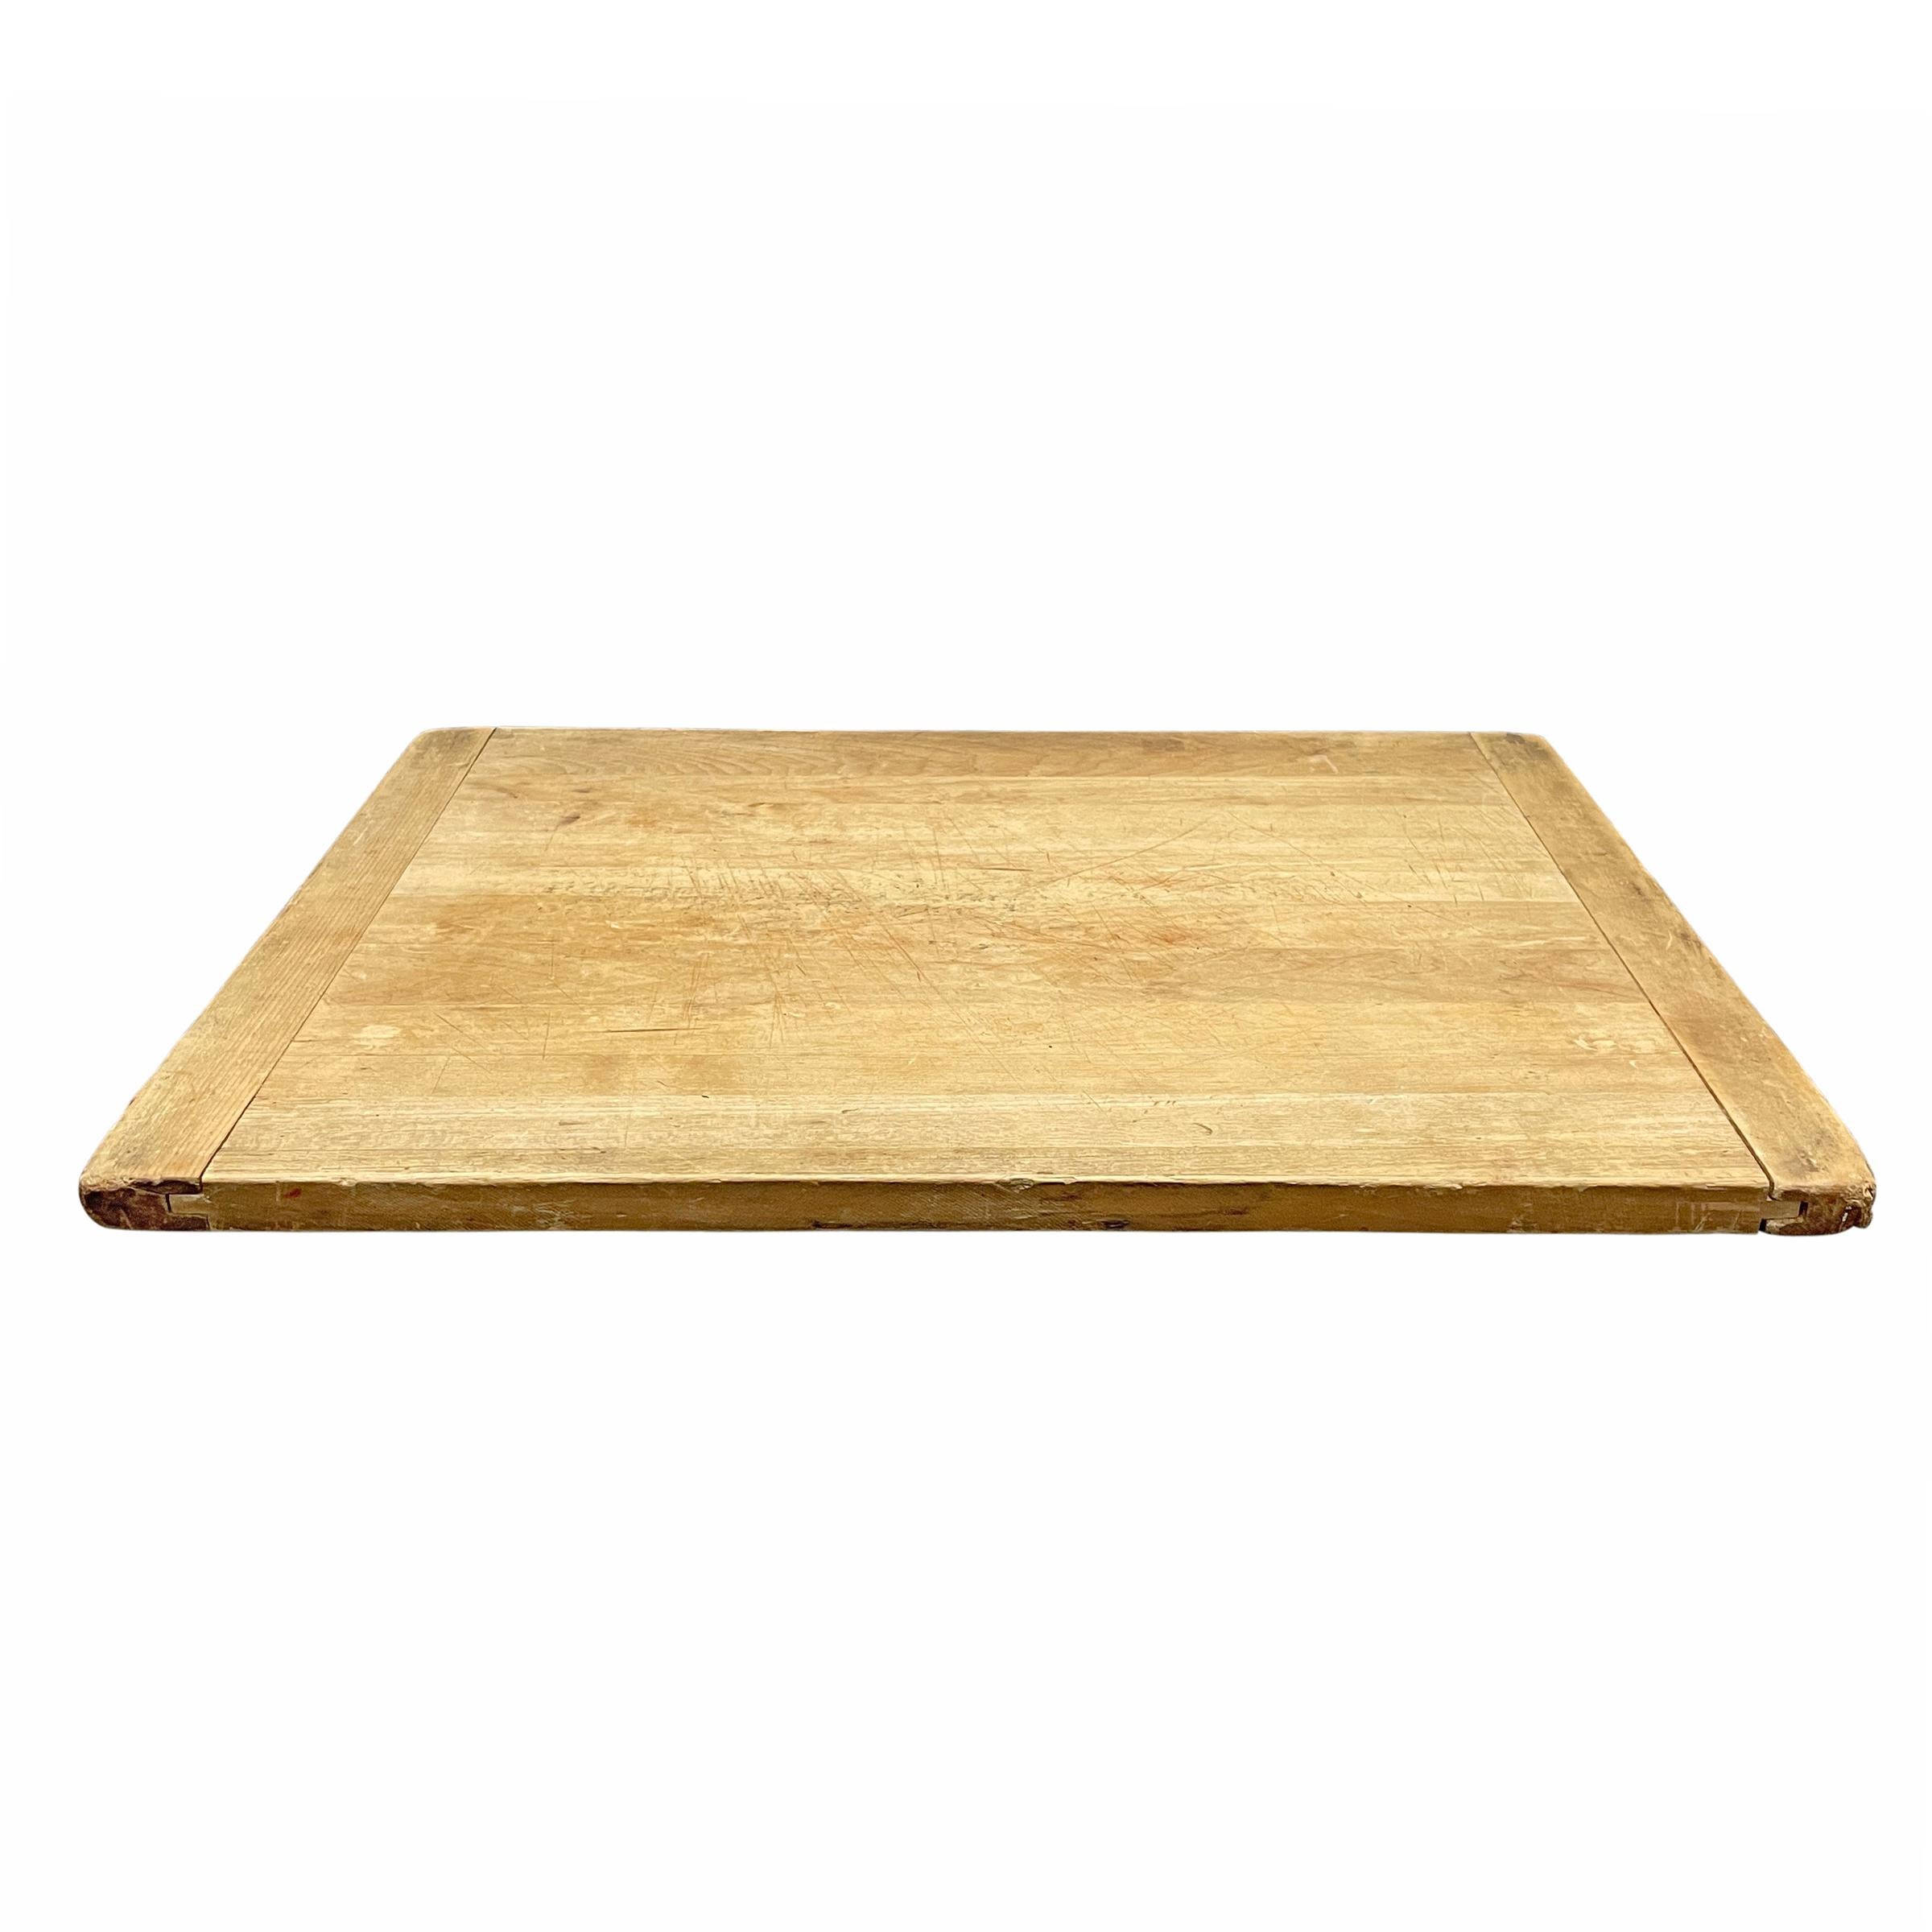 Early 20th Century American Maple Breadboard For Sale 1